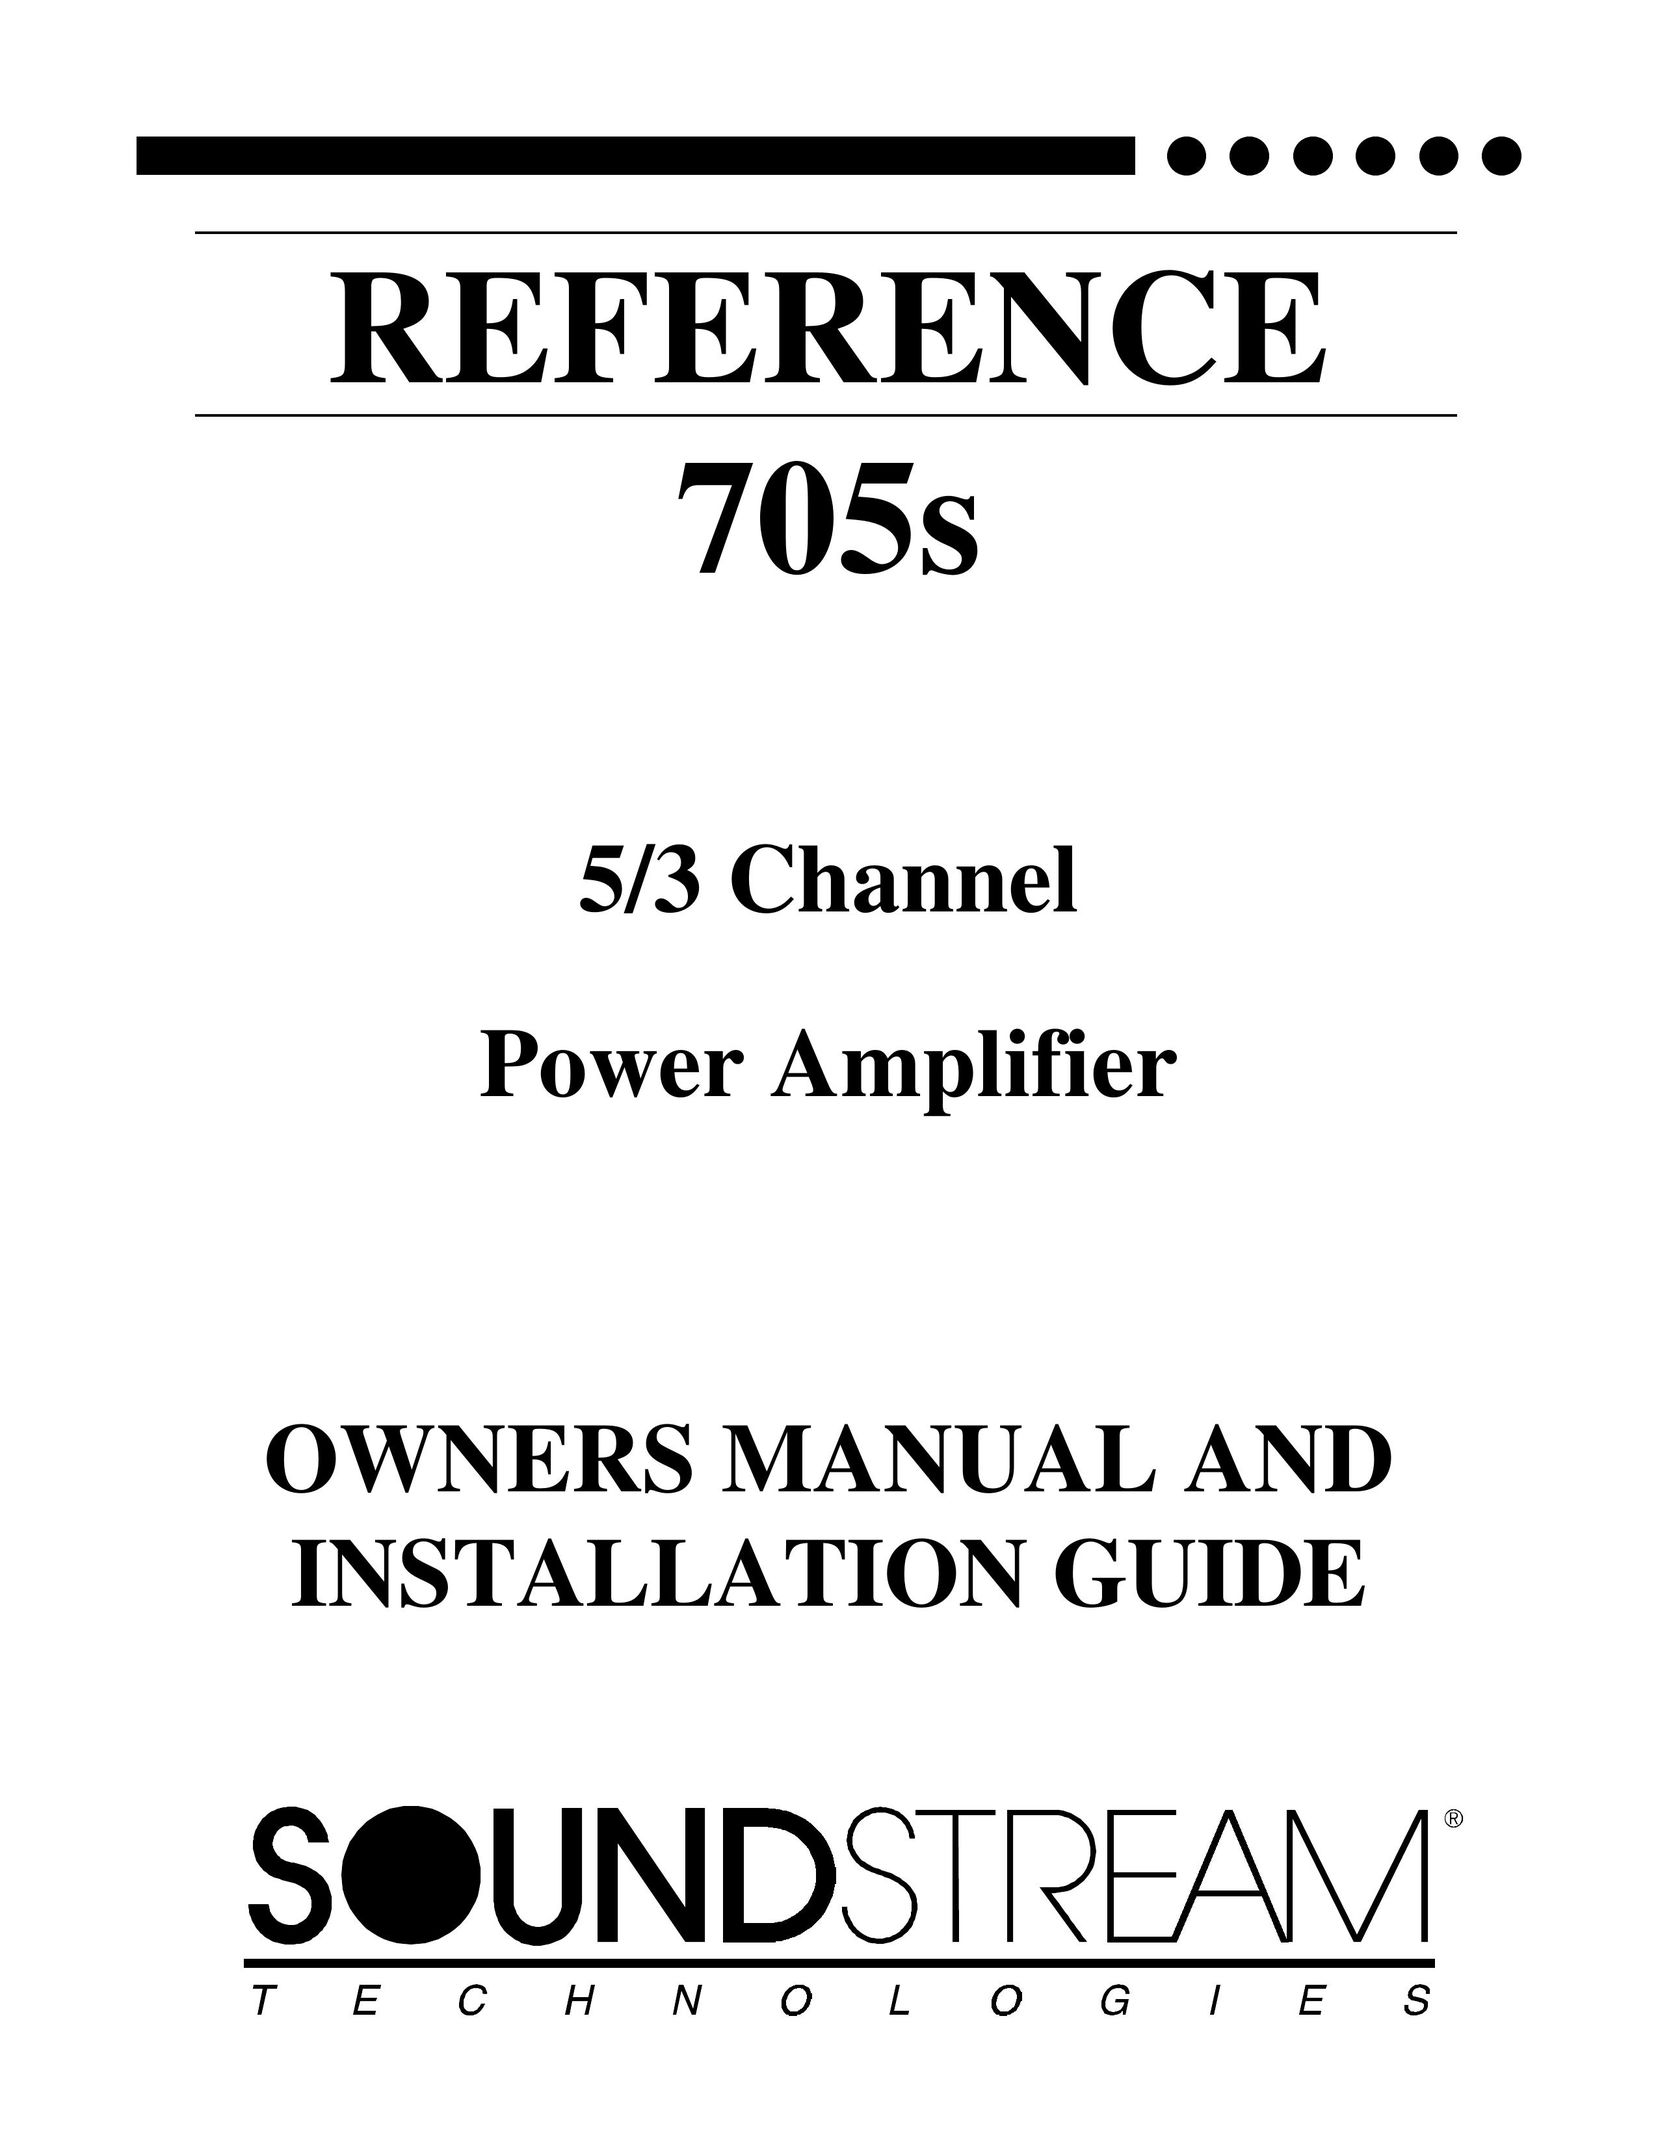 Soundstream Technologies 705s Stereo Amplifier User Manual